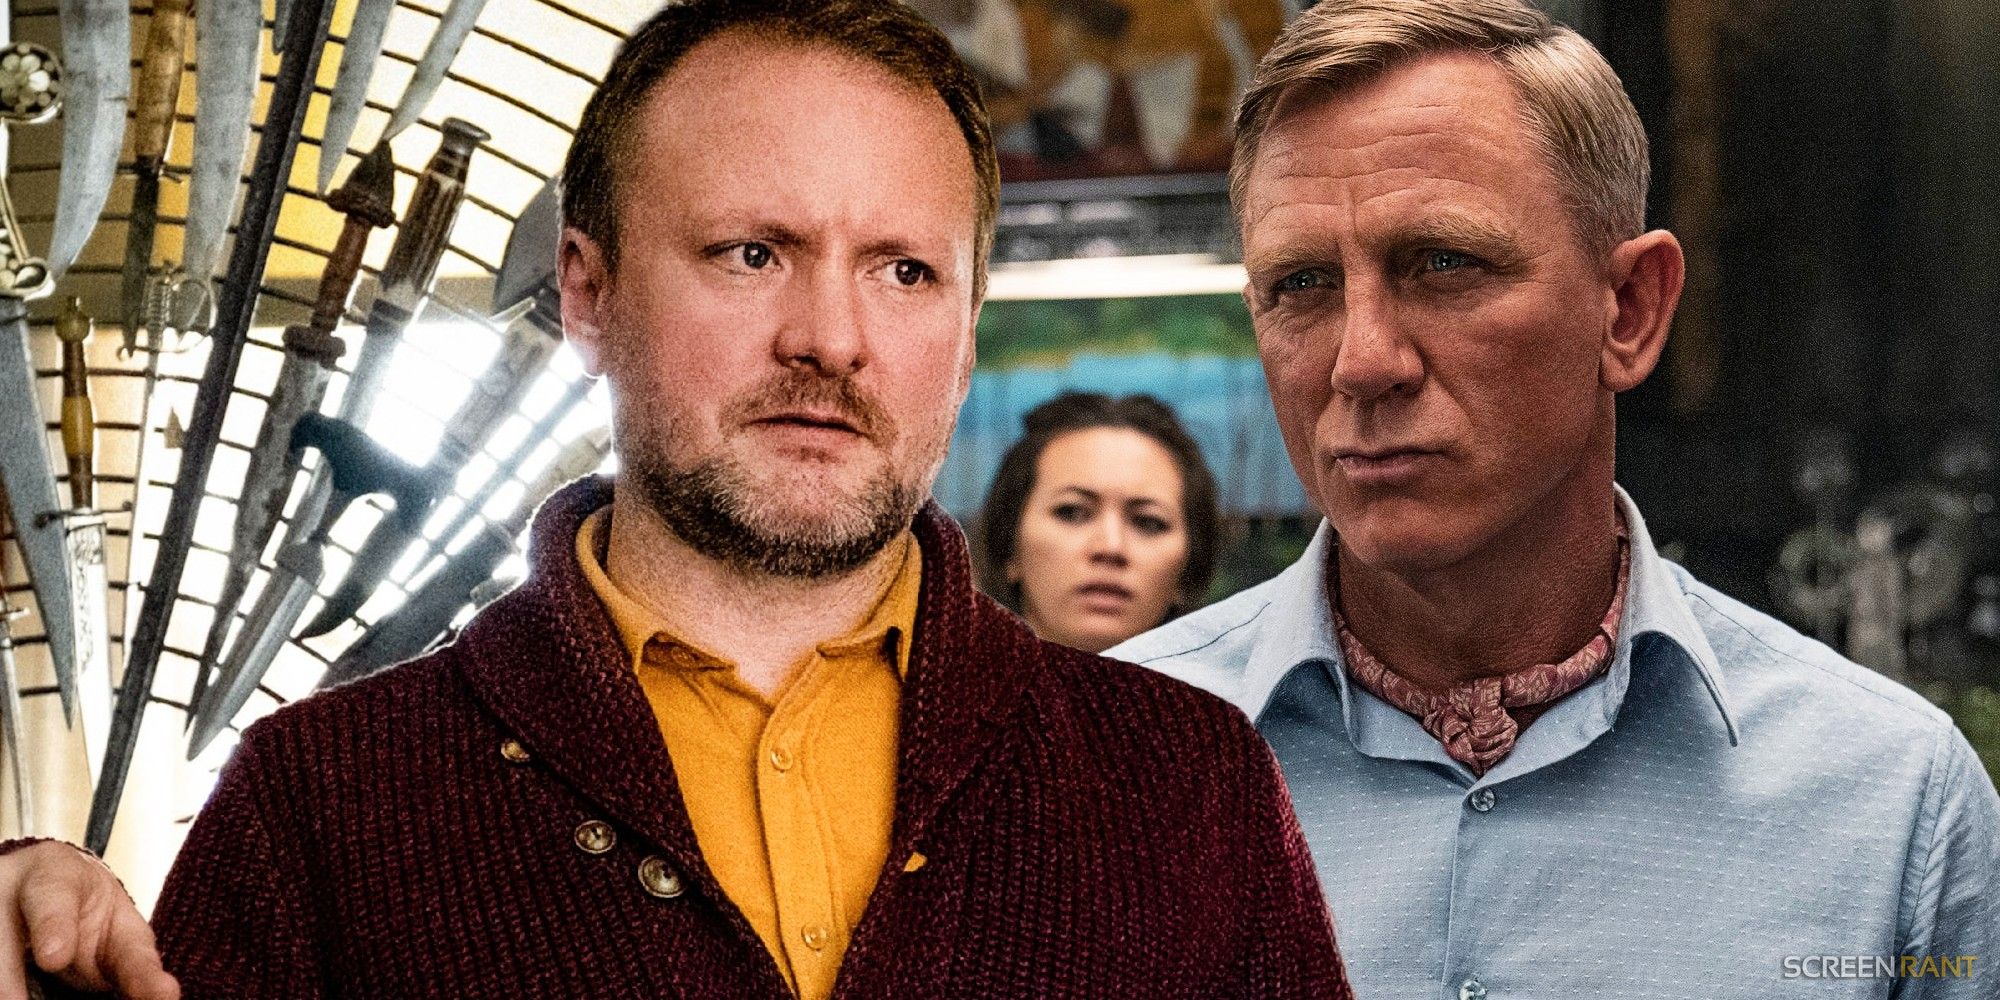 Rian Johnson on the set of Knives Out and Daniel Craig as Benoit Blanc in Glass Onion